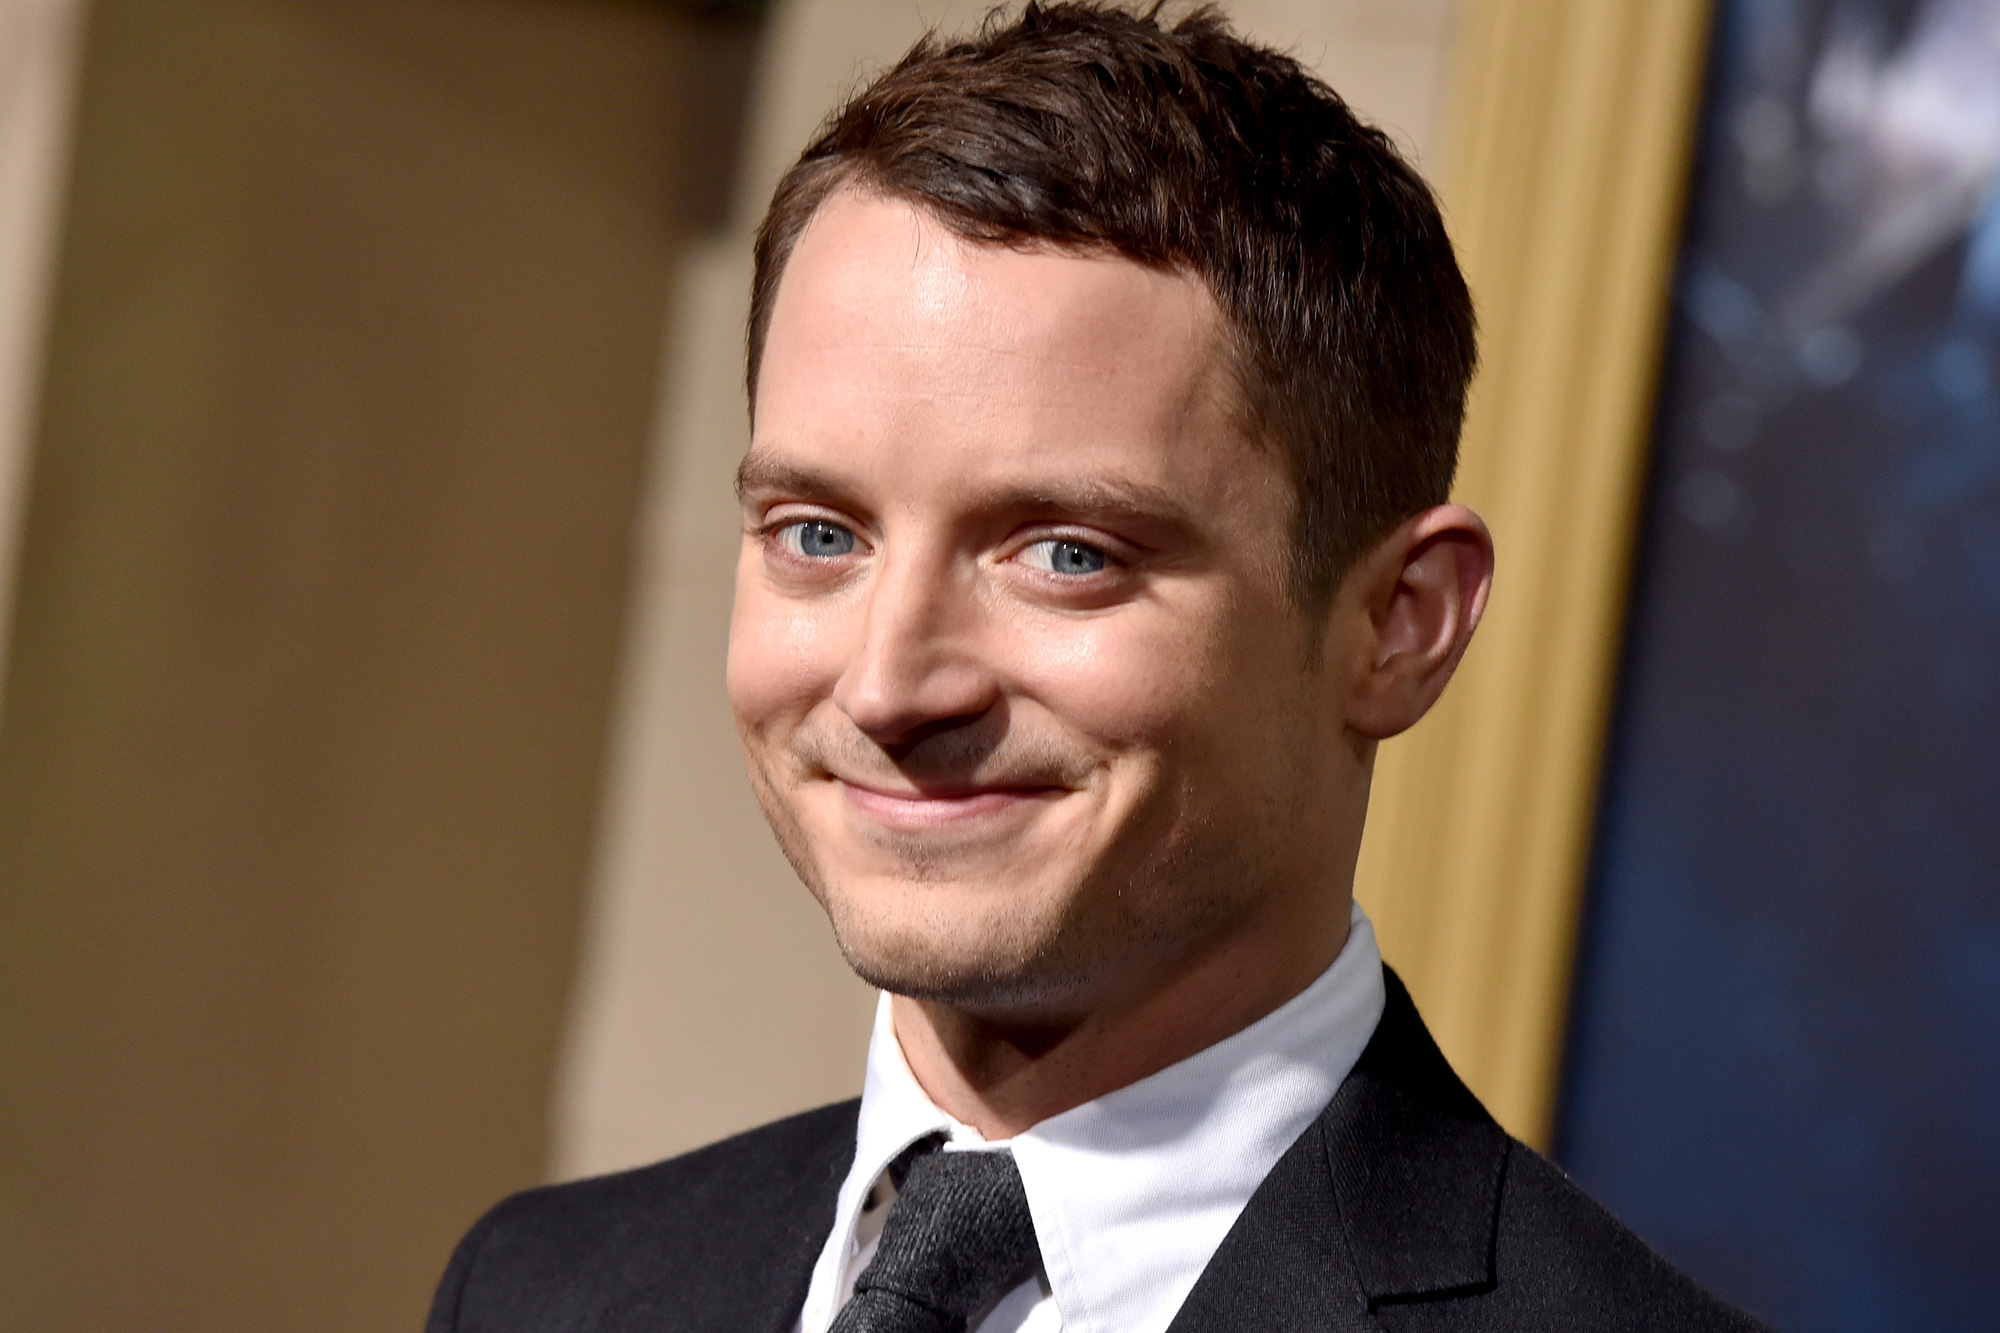 Elijah Wood attends the premiere of New Line Cinema, MGM Pictures and Warner Bros. Pictures' "The Hobbit: The Battle of the Five Armies" at Dolby Theatre on December 9, 2014 in Hollywood, California